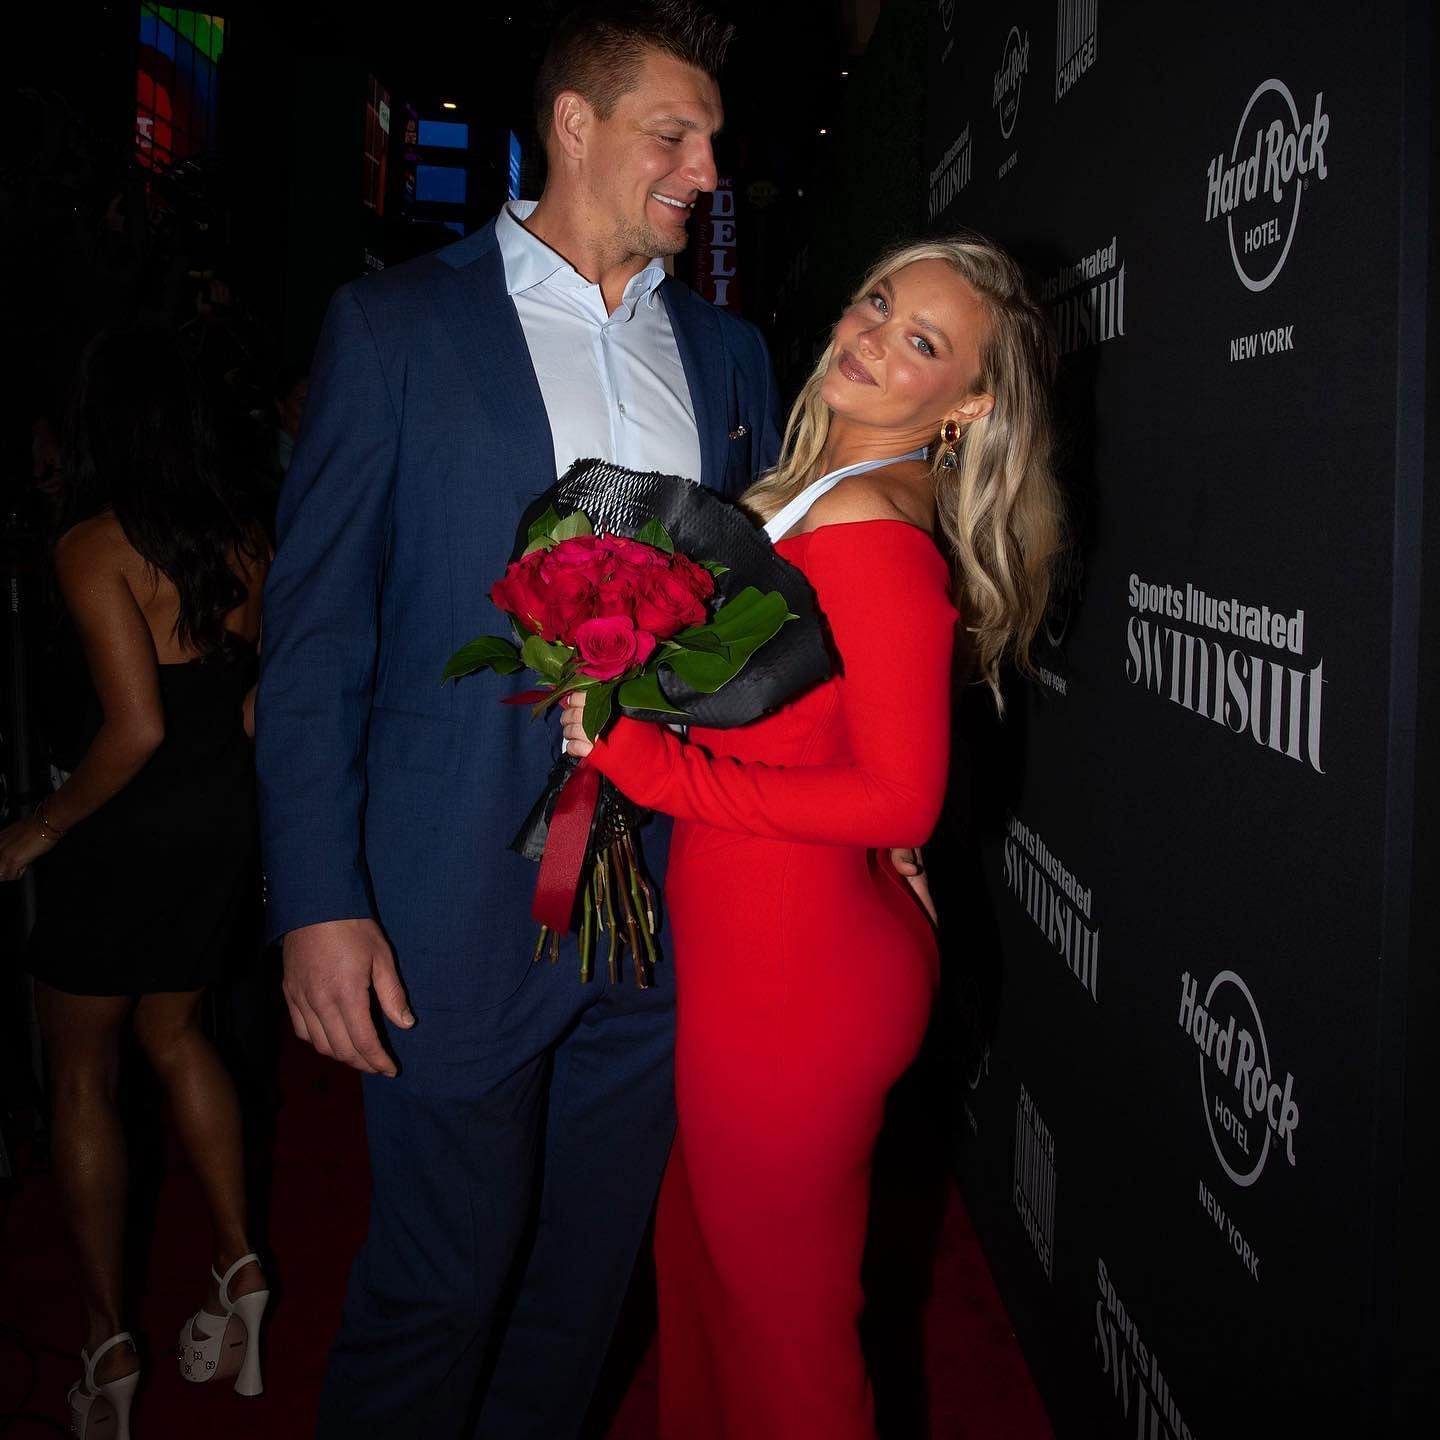 Rob Gronkowski and Camille Kostek at the 2023 Sports Illustrated Swimsuit Issue launch party - image via IG/@camillekostek